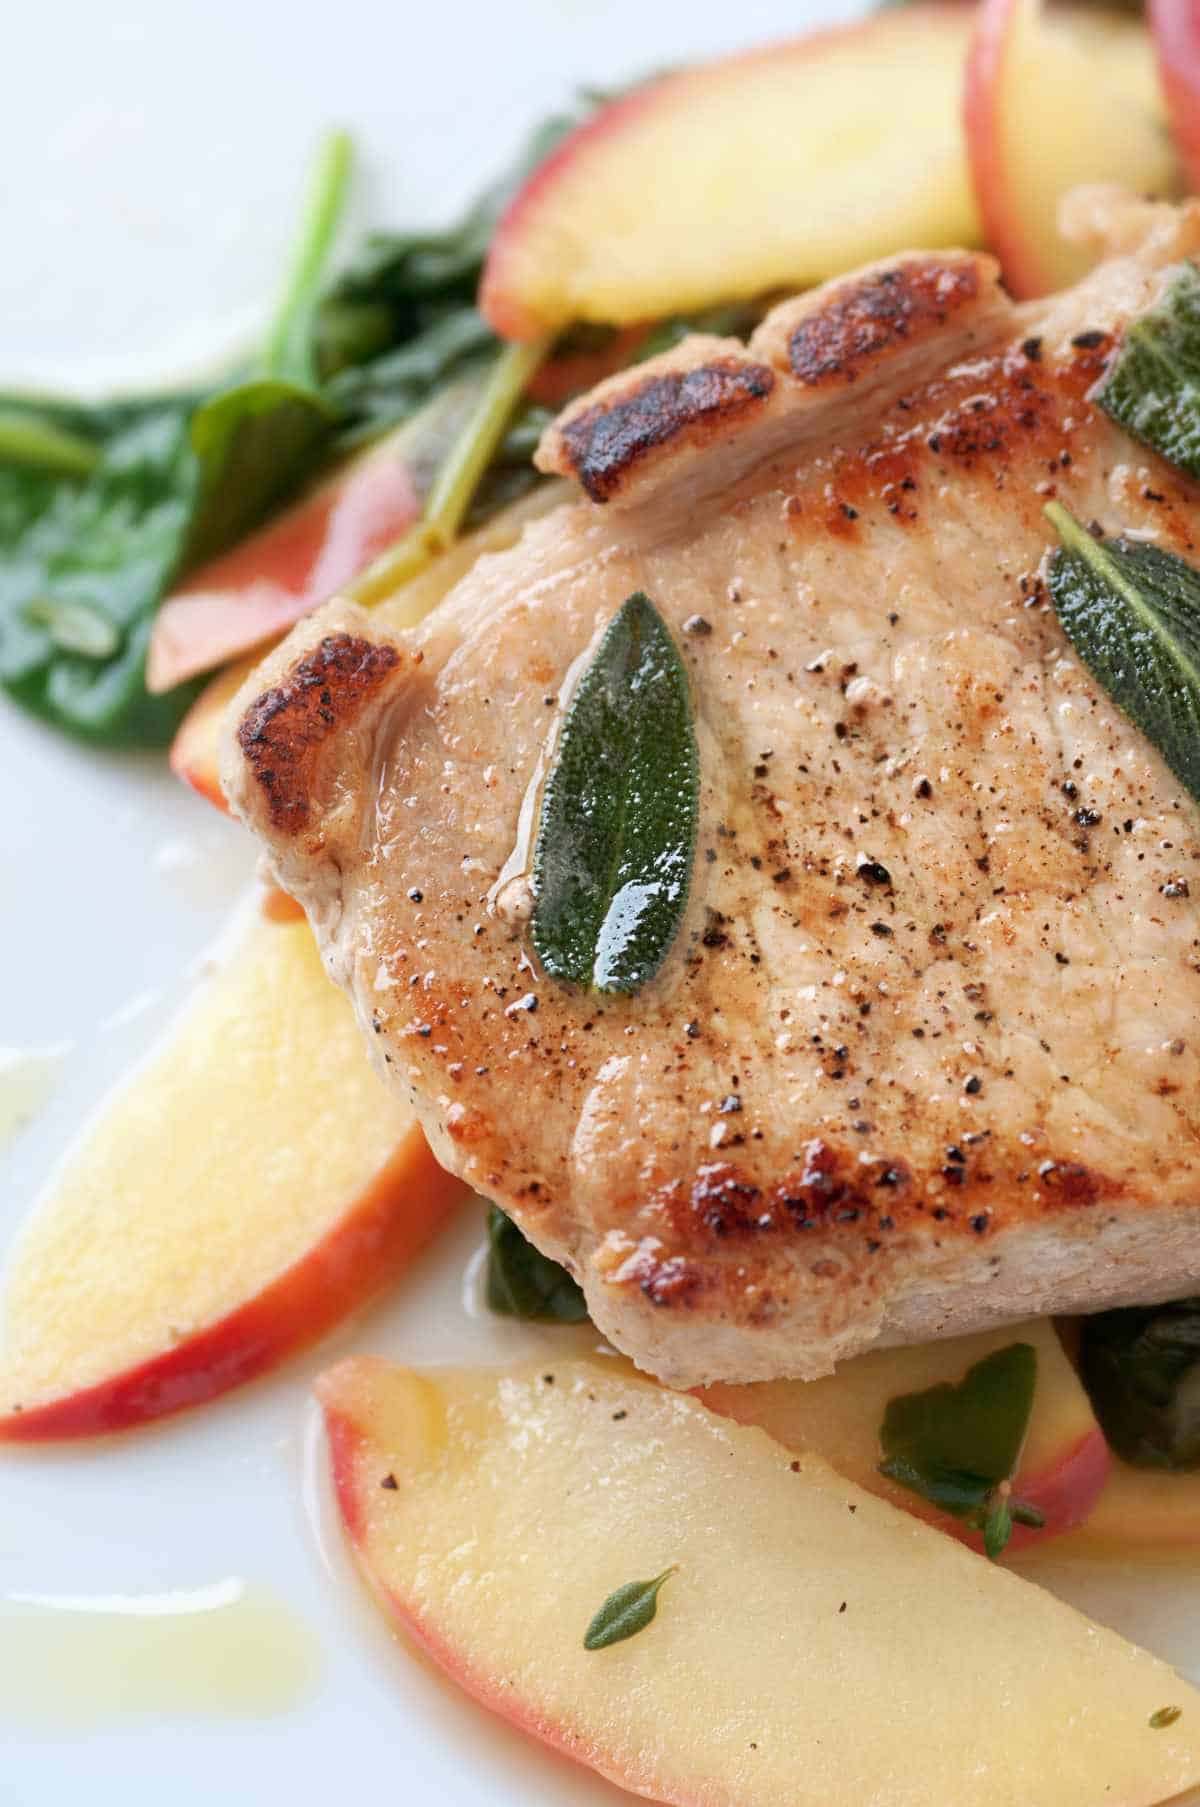 Golden pork chop with warm apple and green salad.